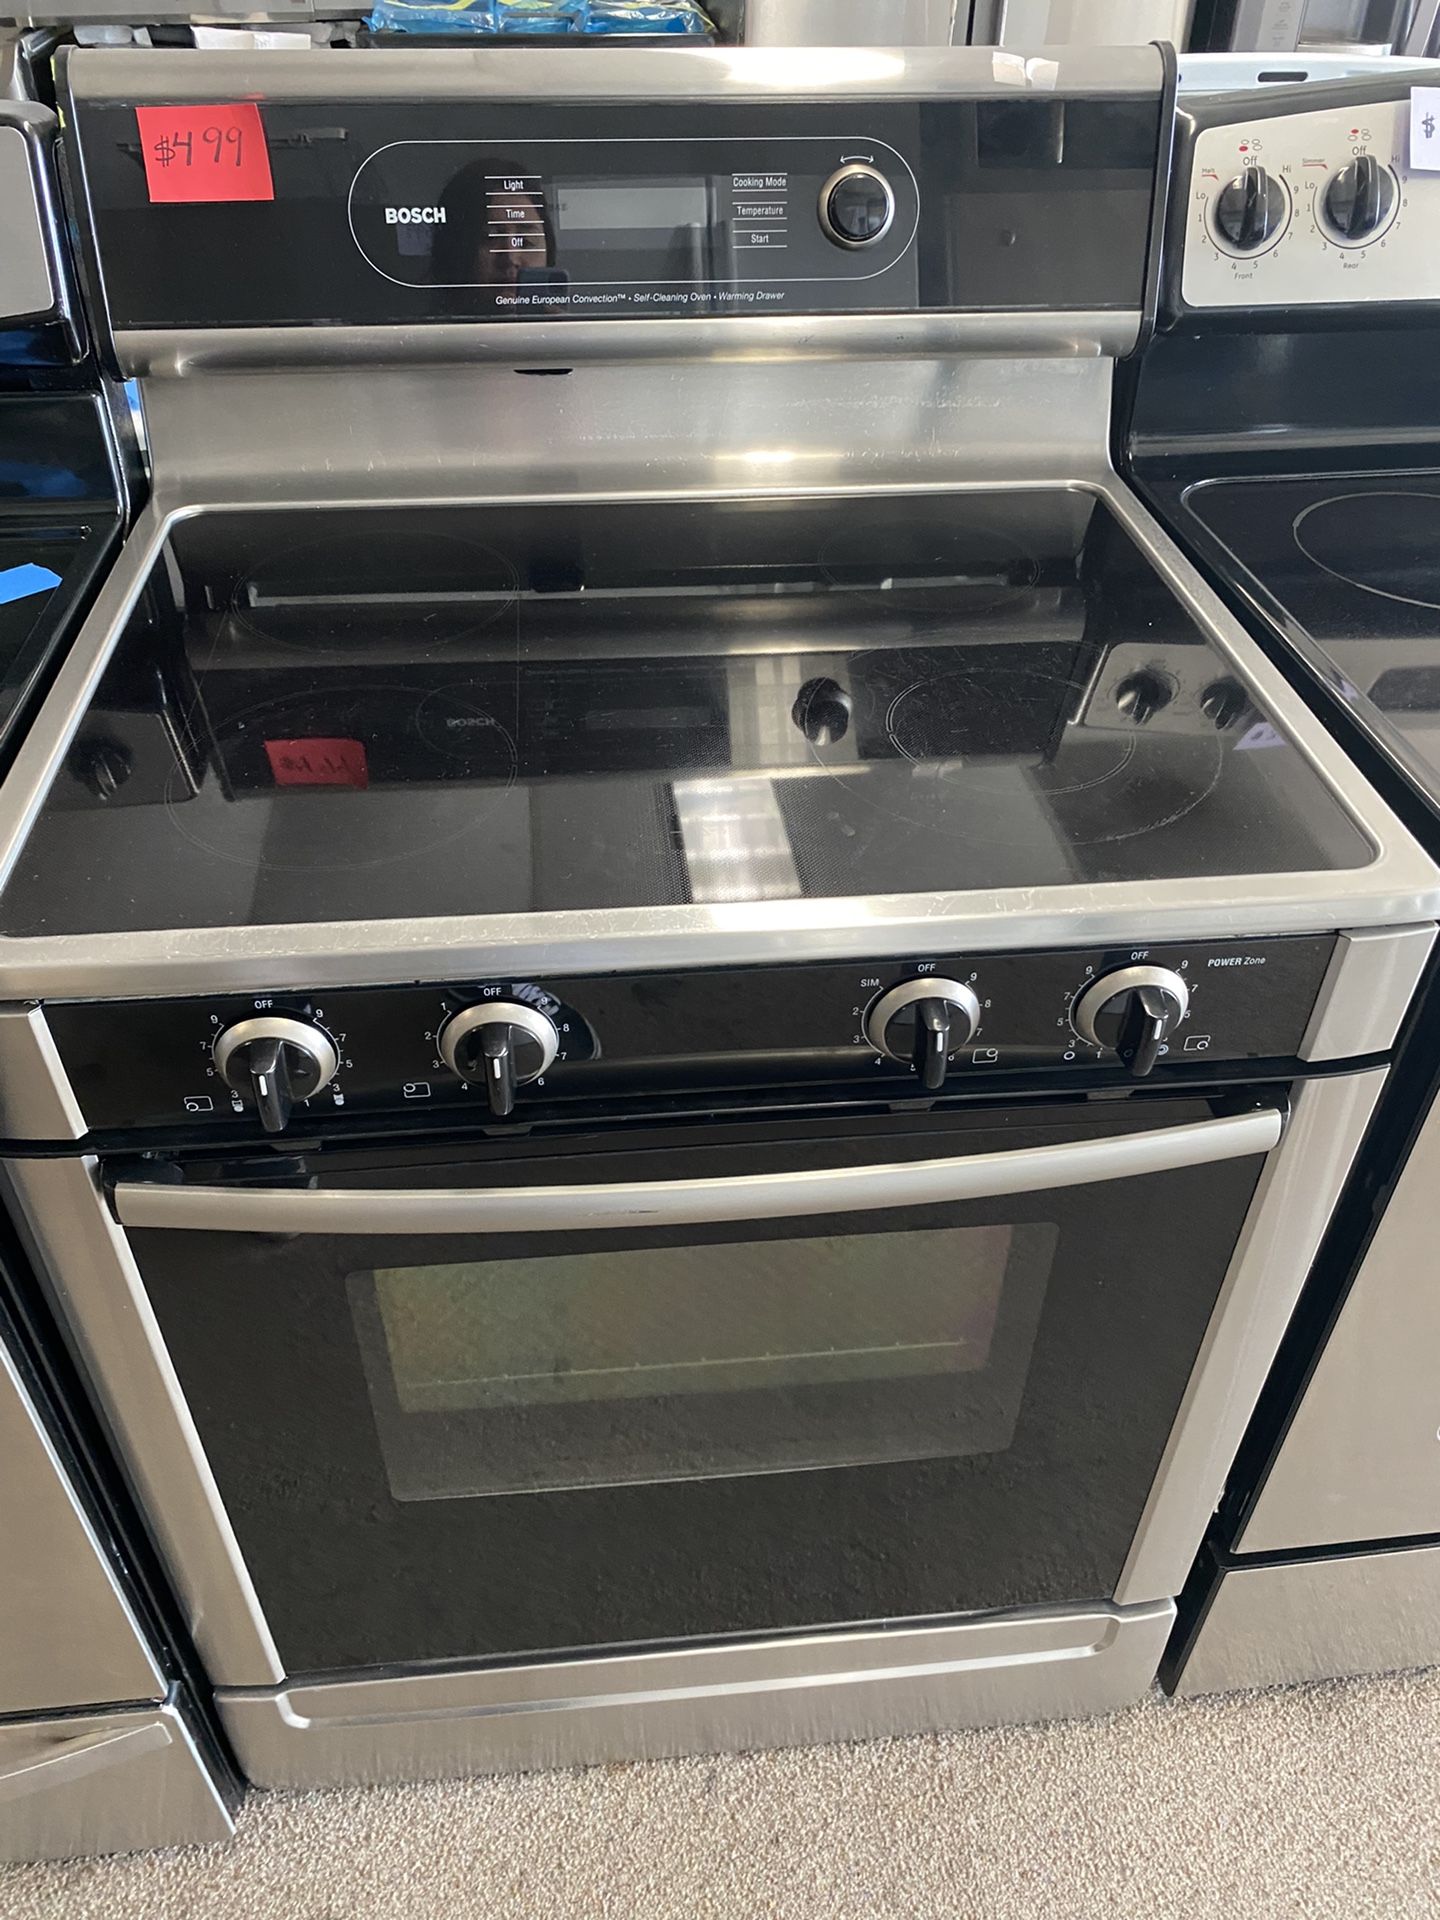 Bosch Electric Stove Used Excellent Conditions 